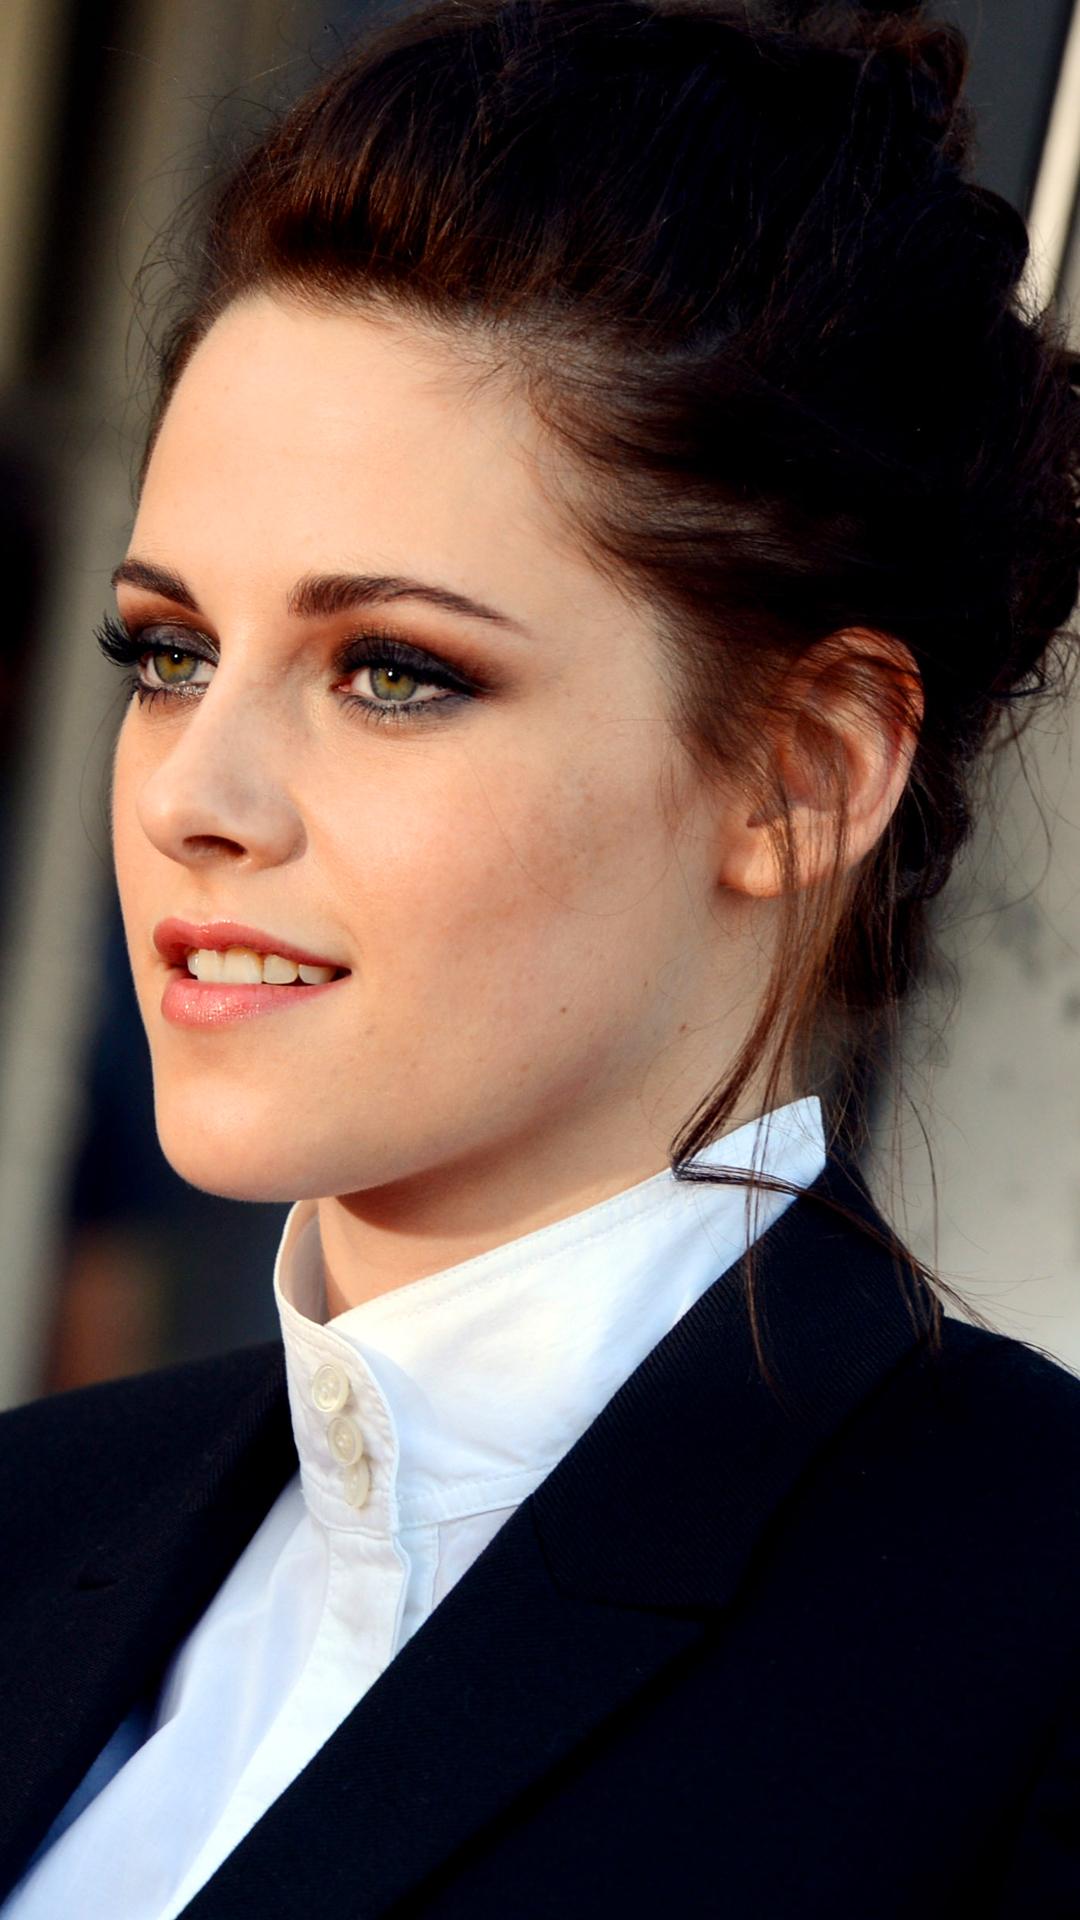 Kristen Stewart htc one wallpaper, free and easy to download